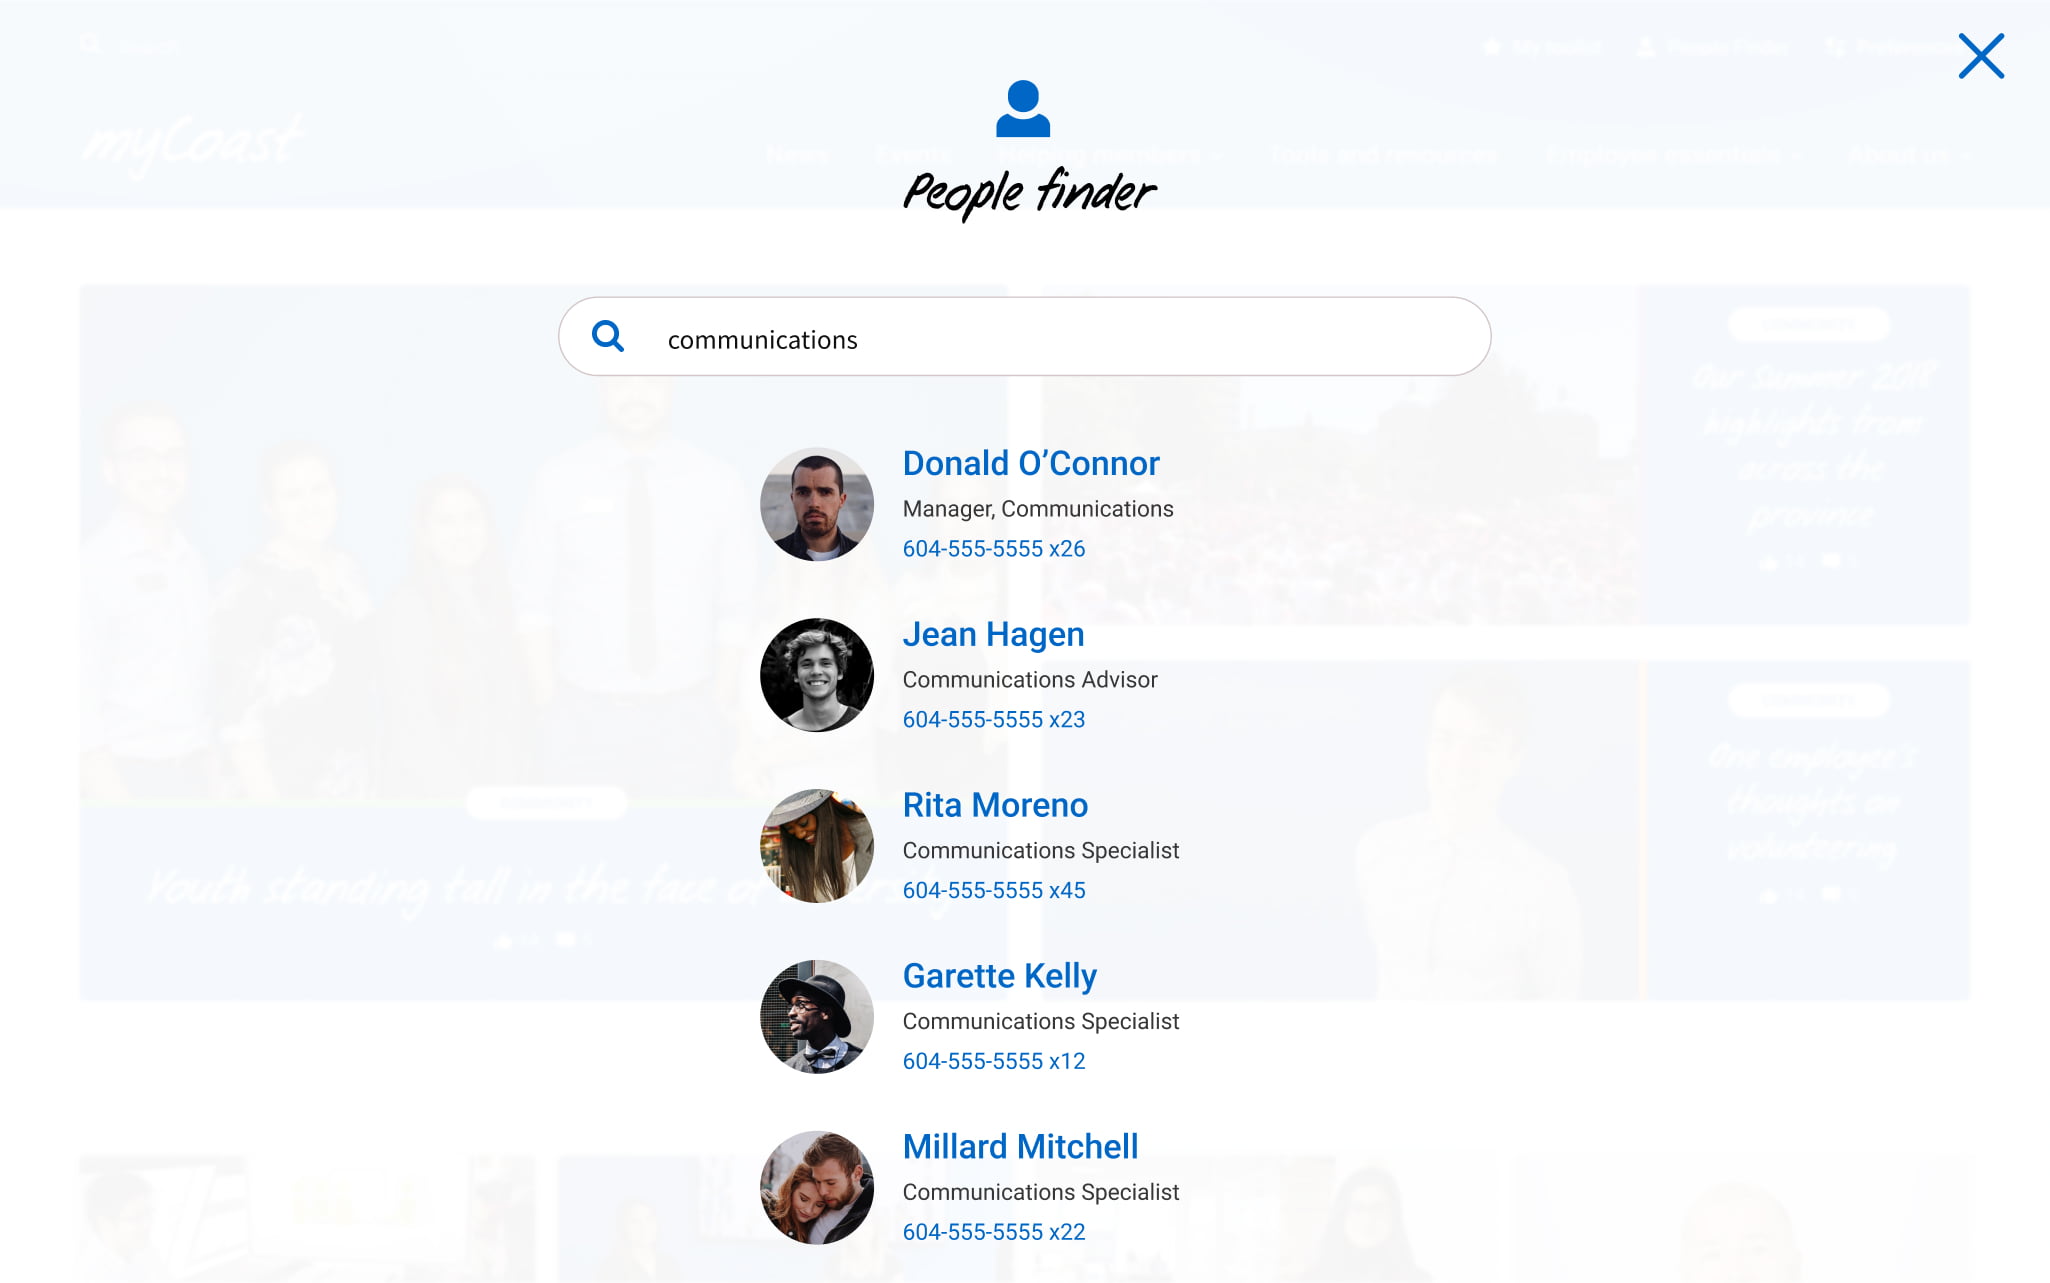 A screenshot of the people finder.